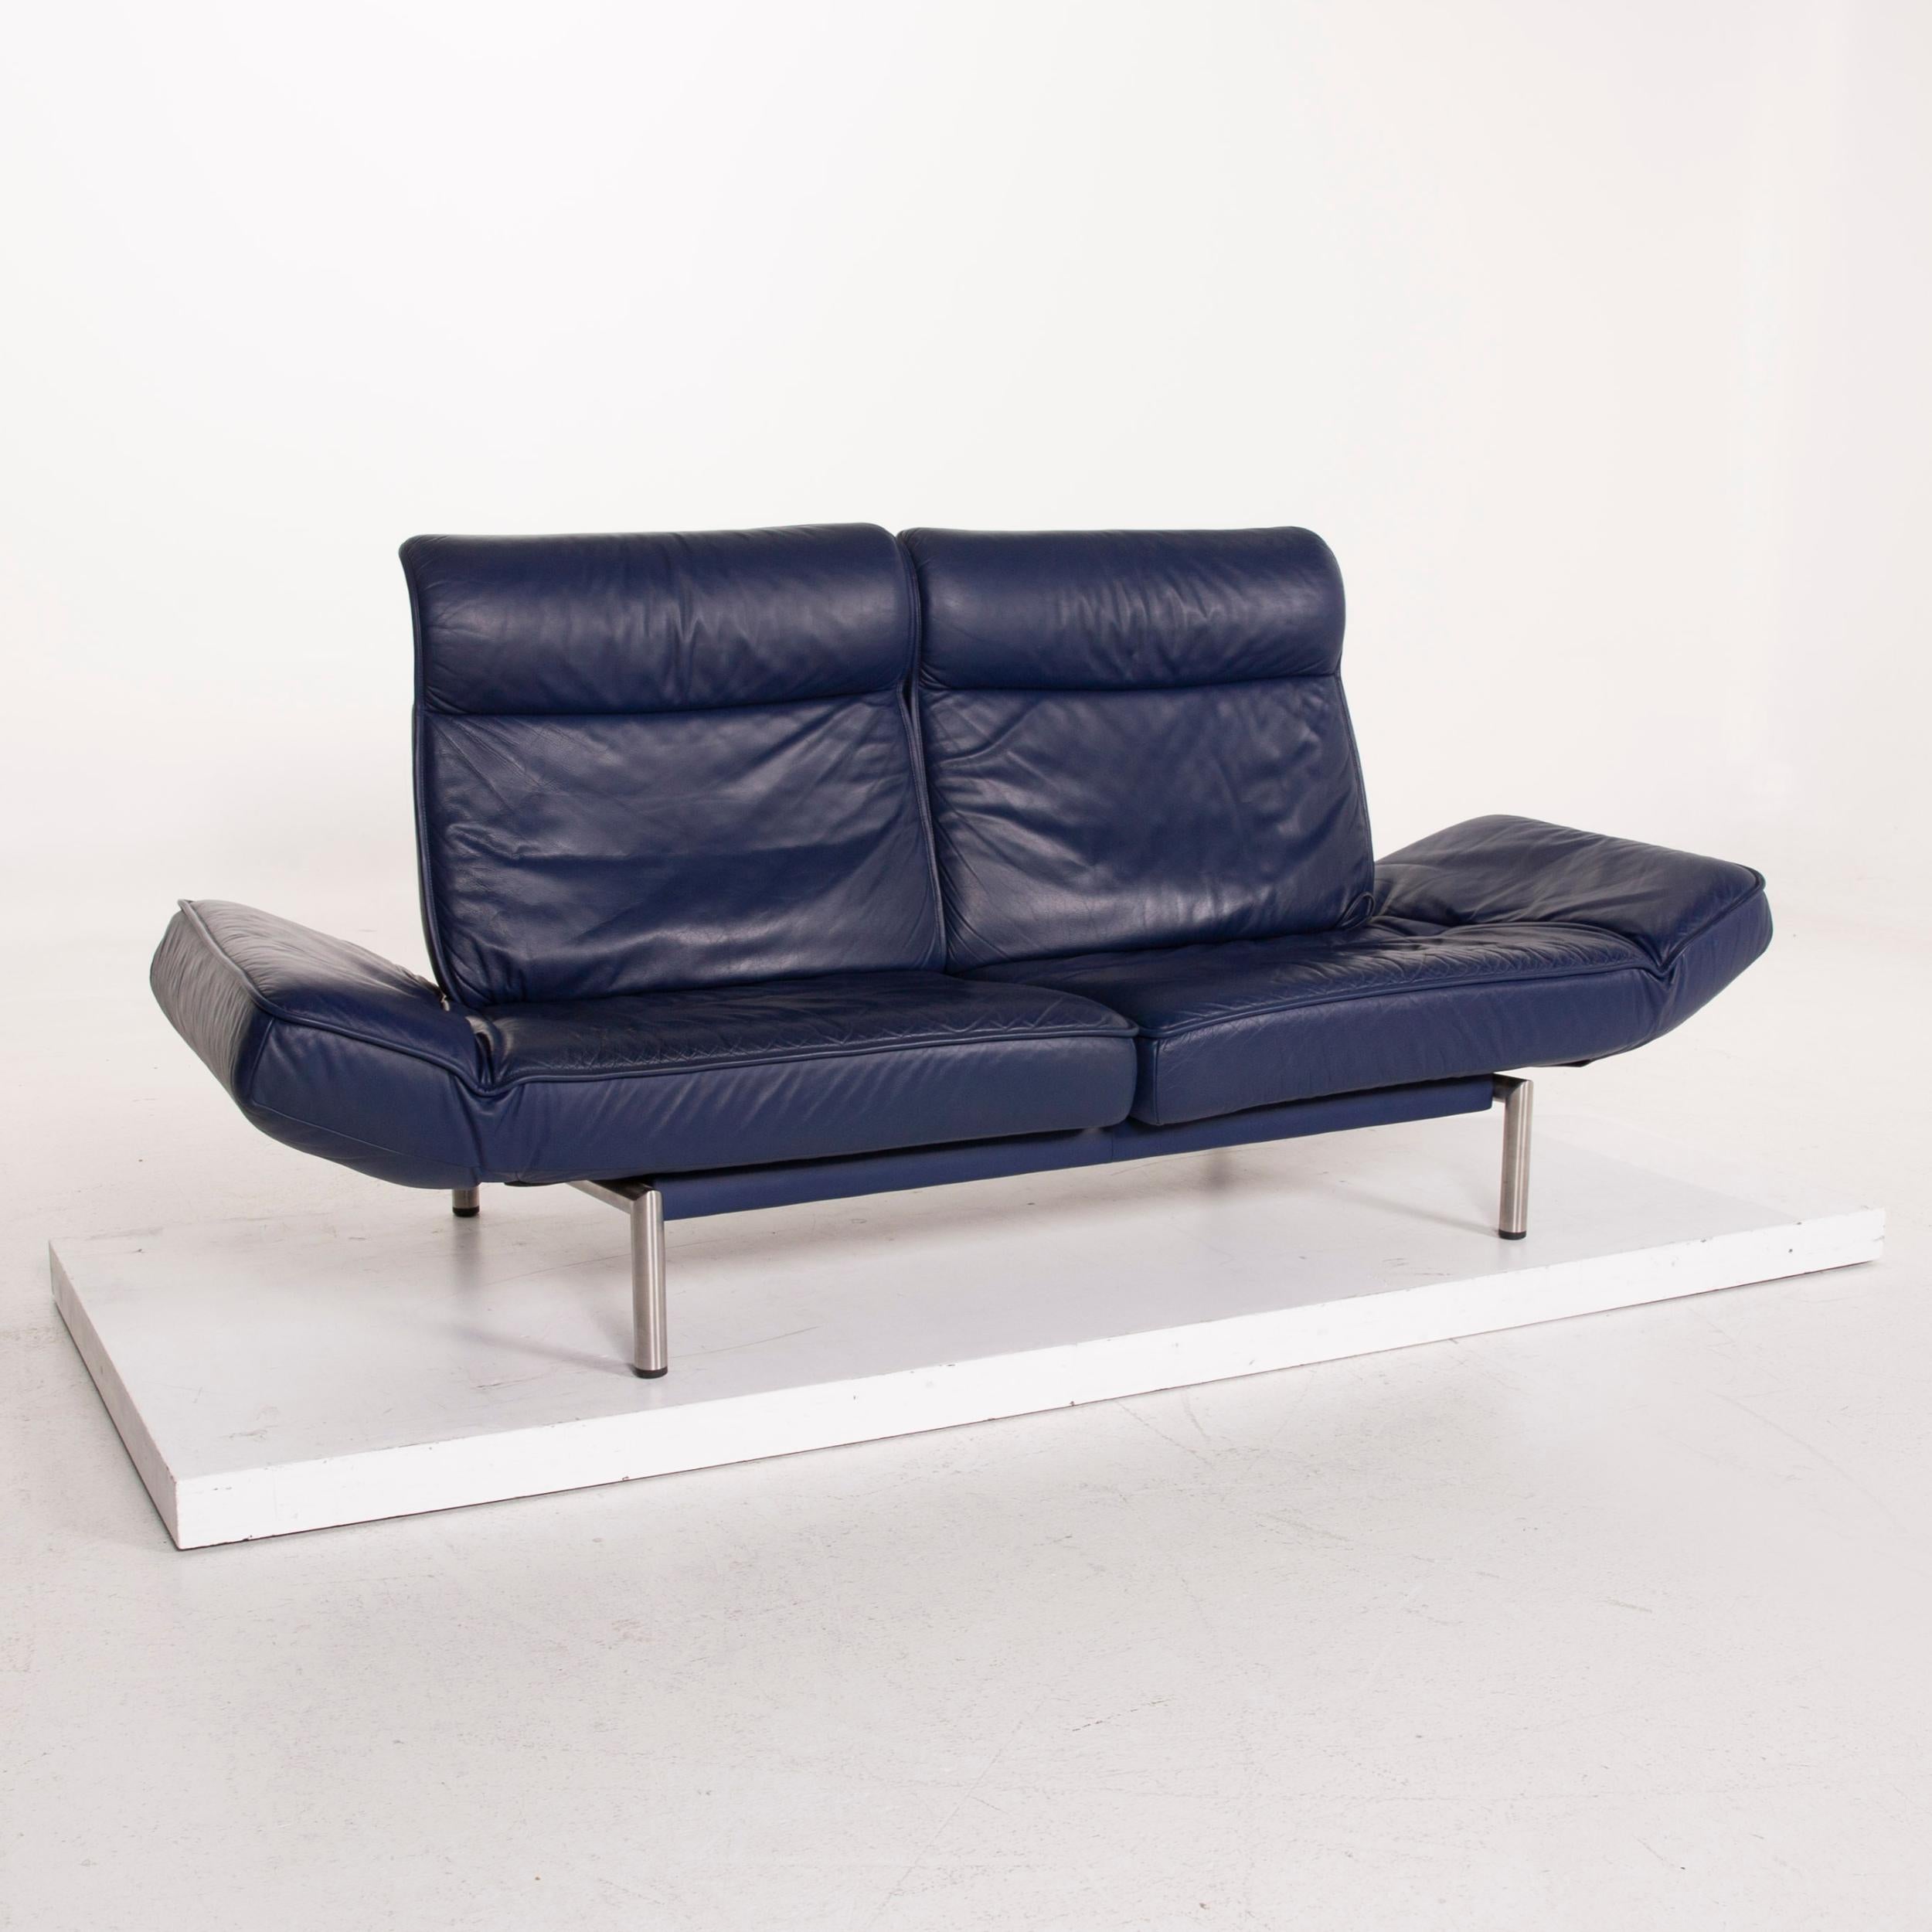 Contemporary De Sede Ds 450 Leather Sofa Blue Two-Seat Function For Sale